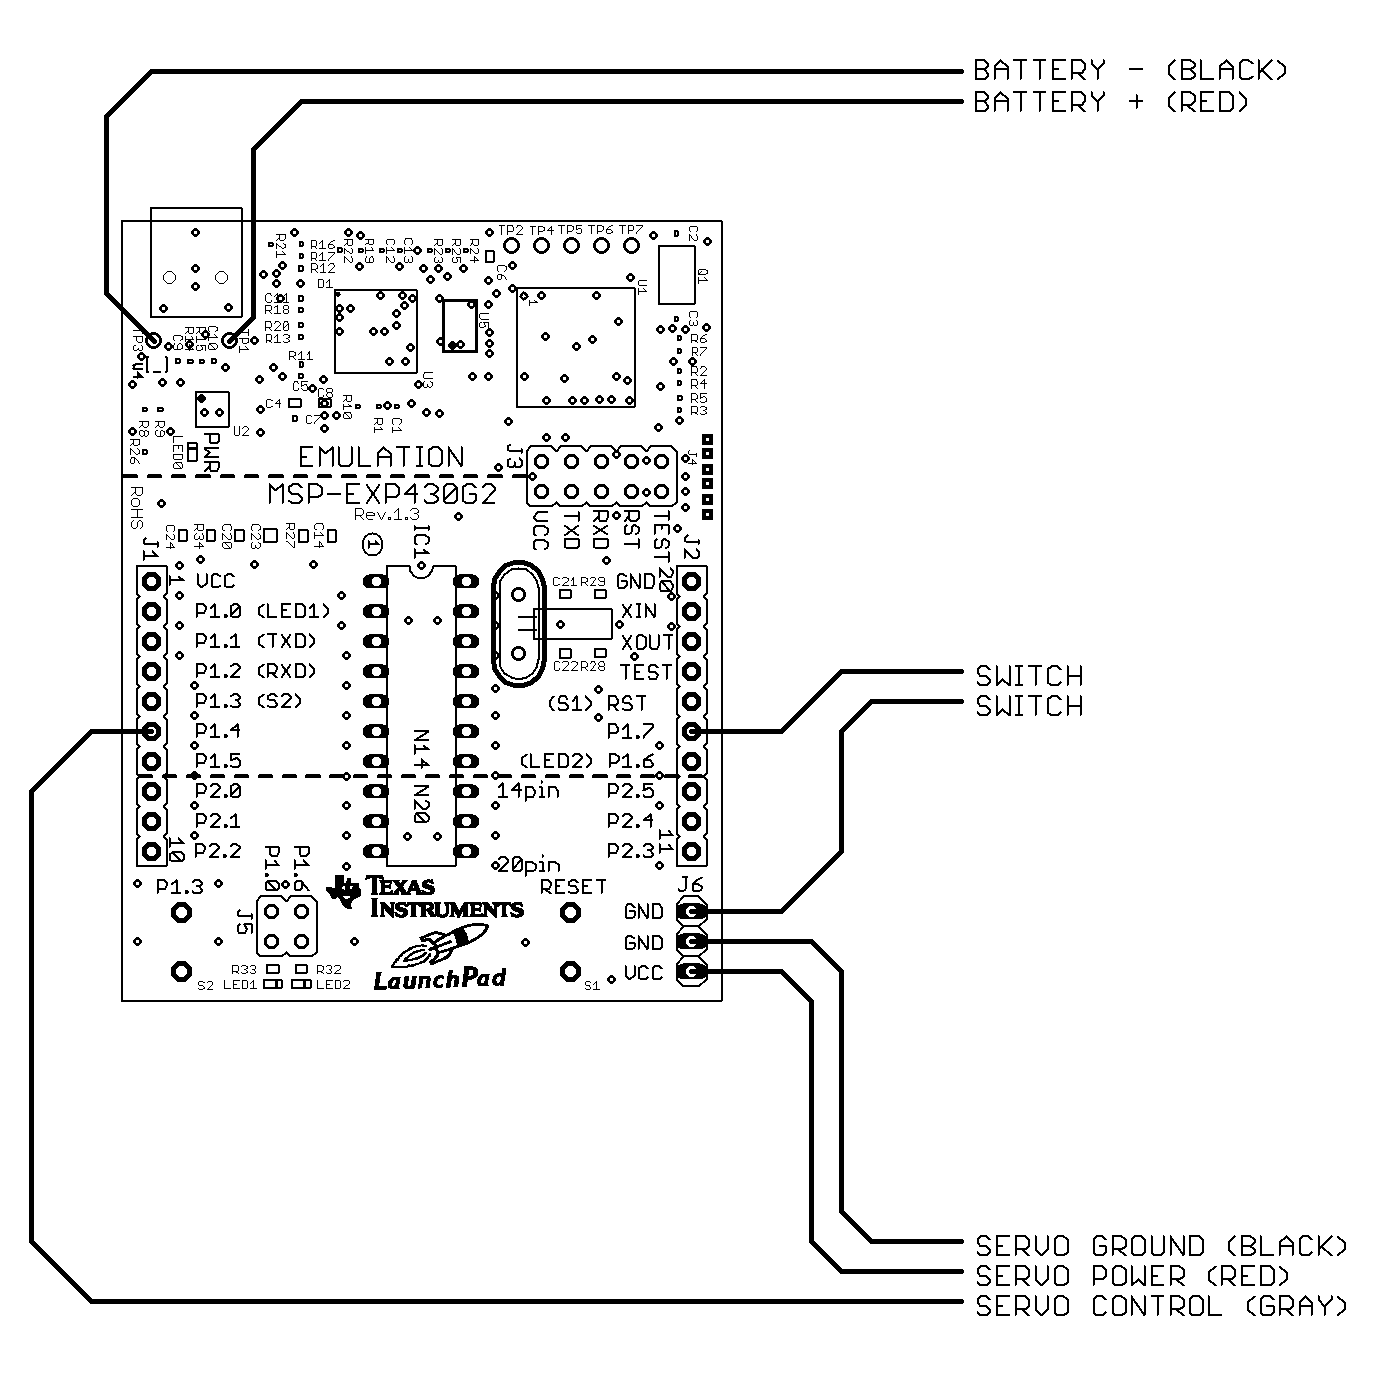 Wiring Diagram for the ServoChron low cost Servo Timer from U.S. Water Rockets